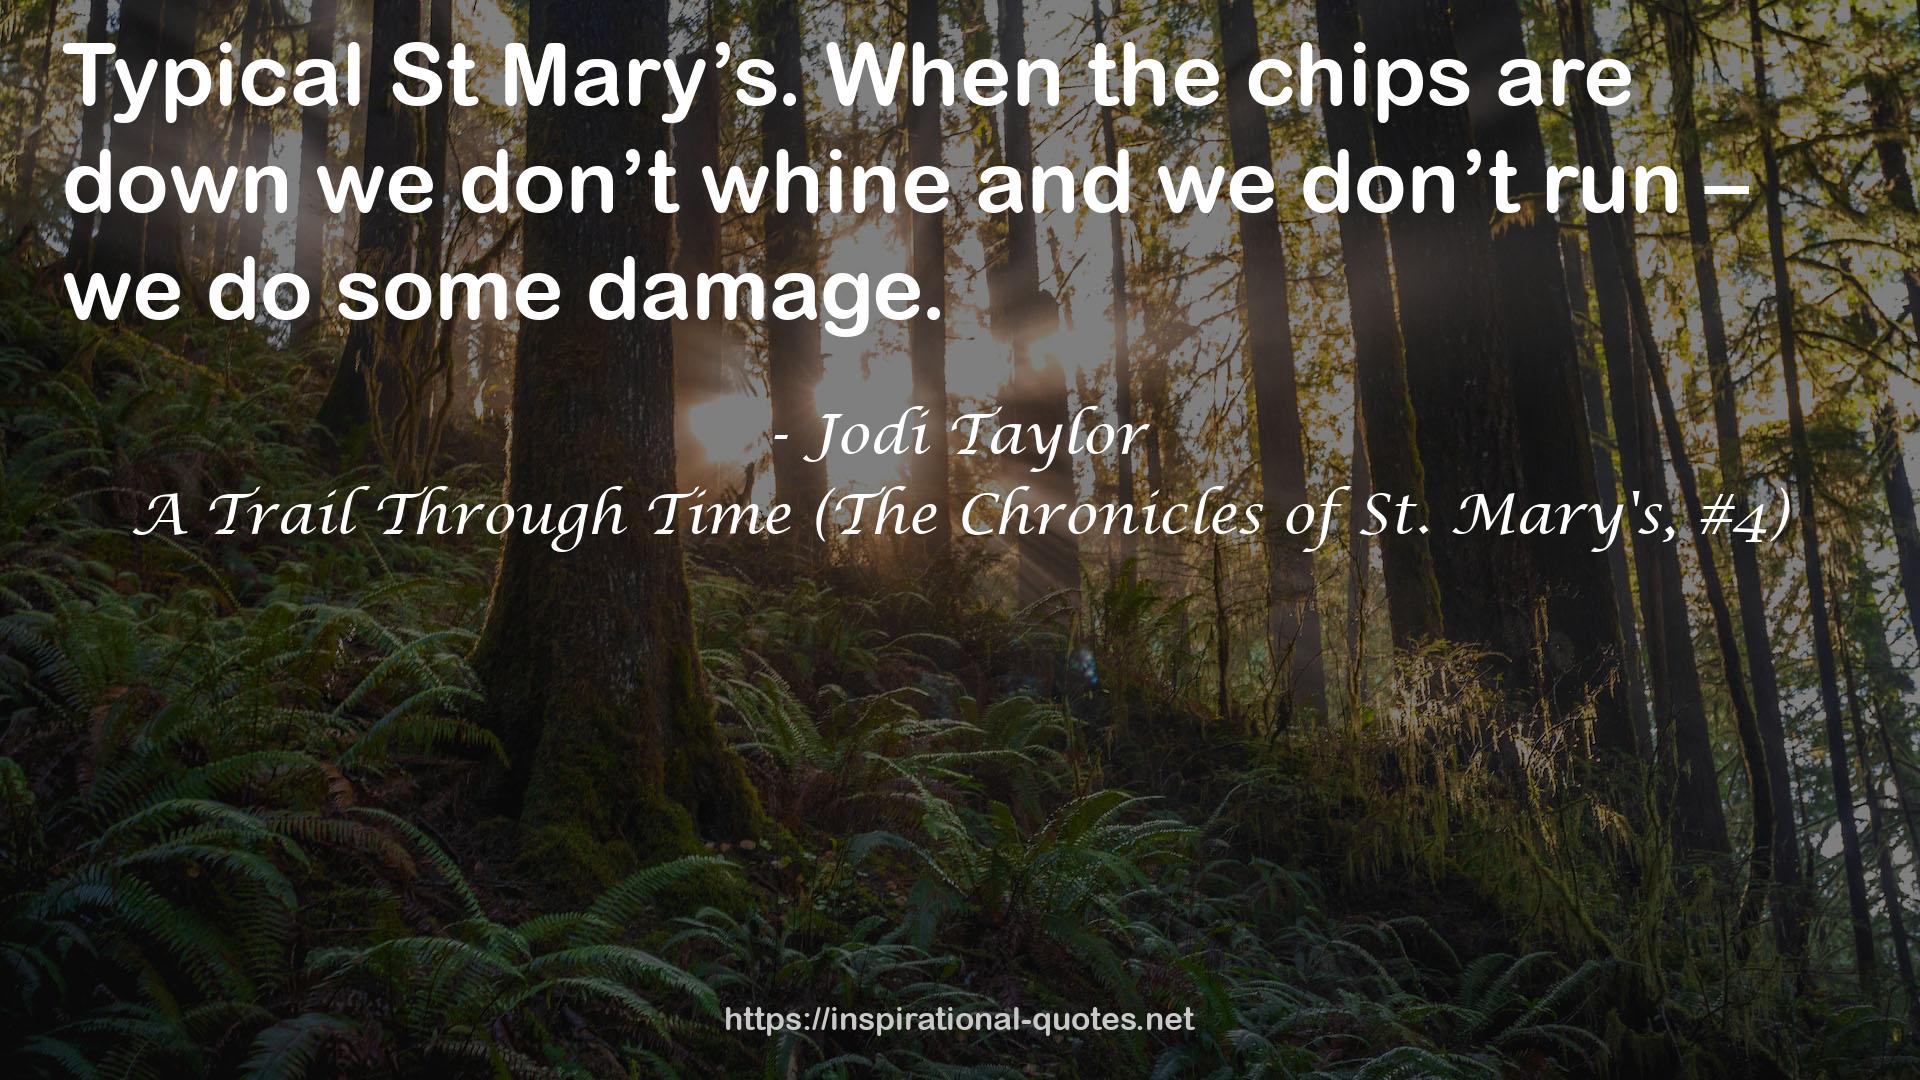 A Trail Through Time (The Chronicles of St. Mary's, #4) QUOTES